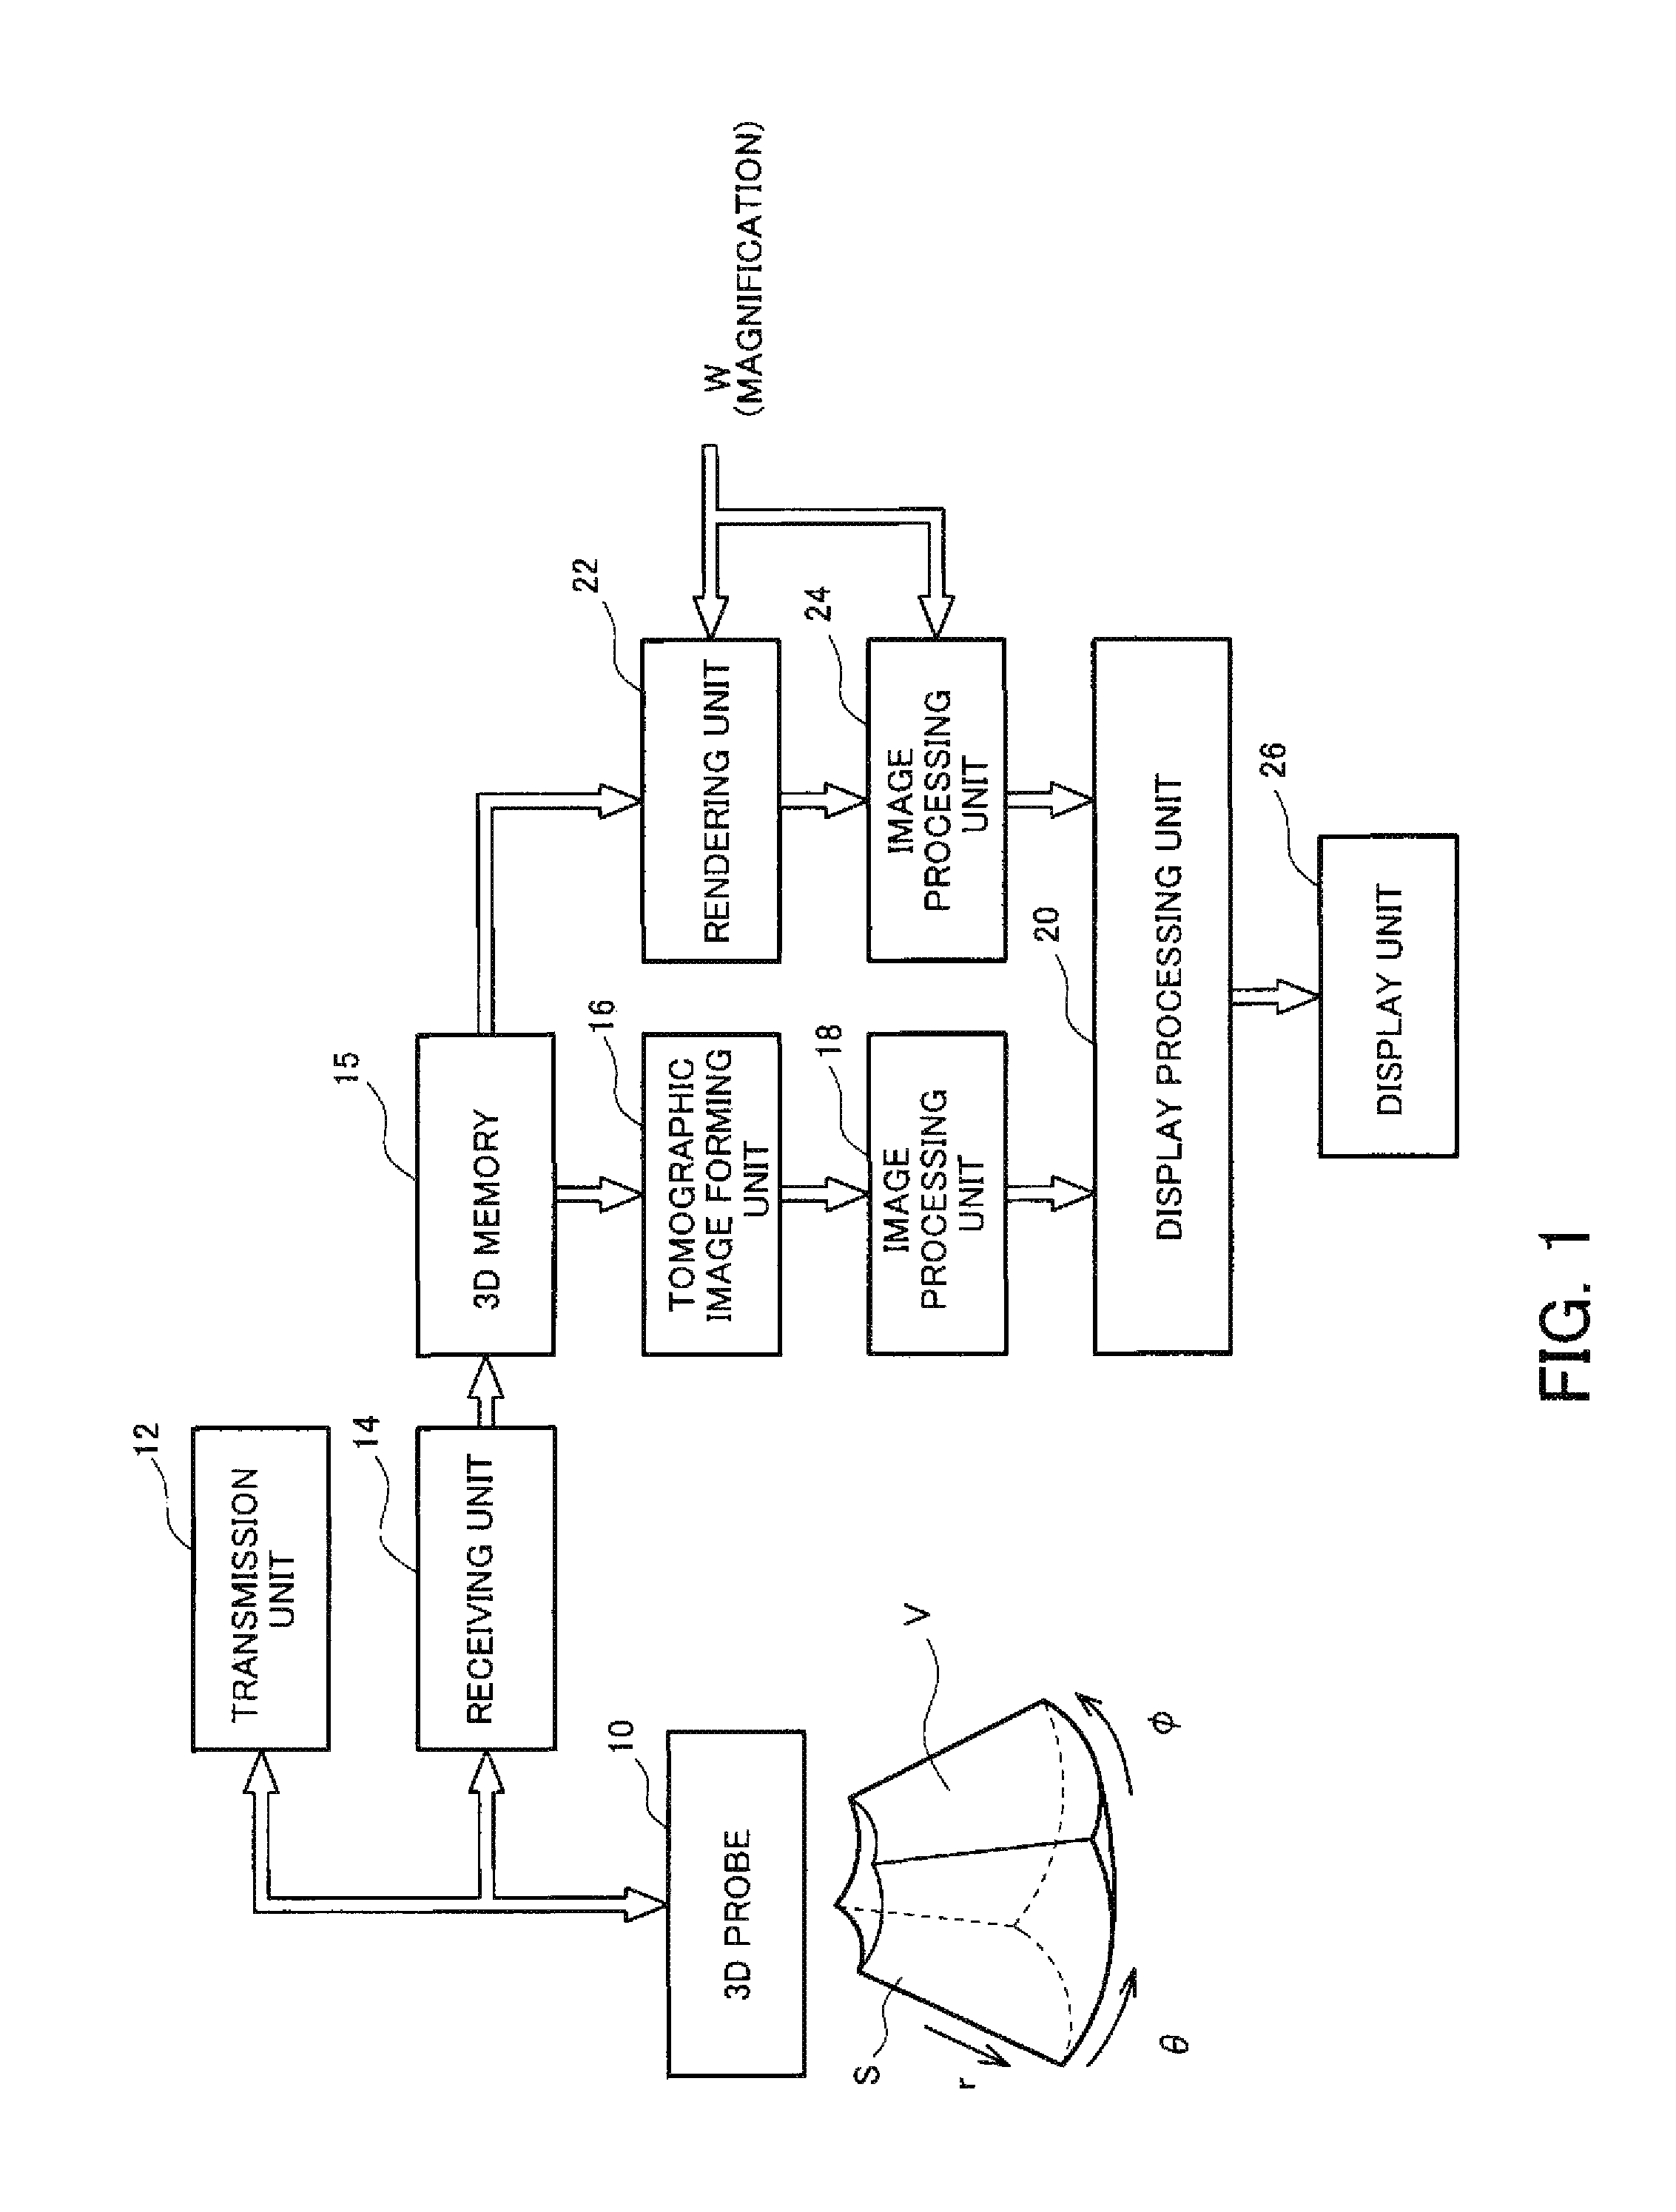 Ultrasonic image processing with directional interpolation in order to increase the resolution of an image